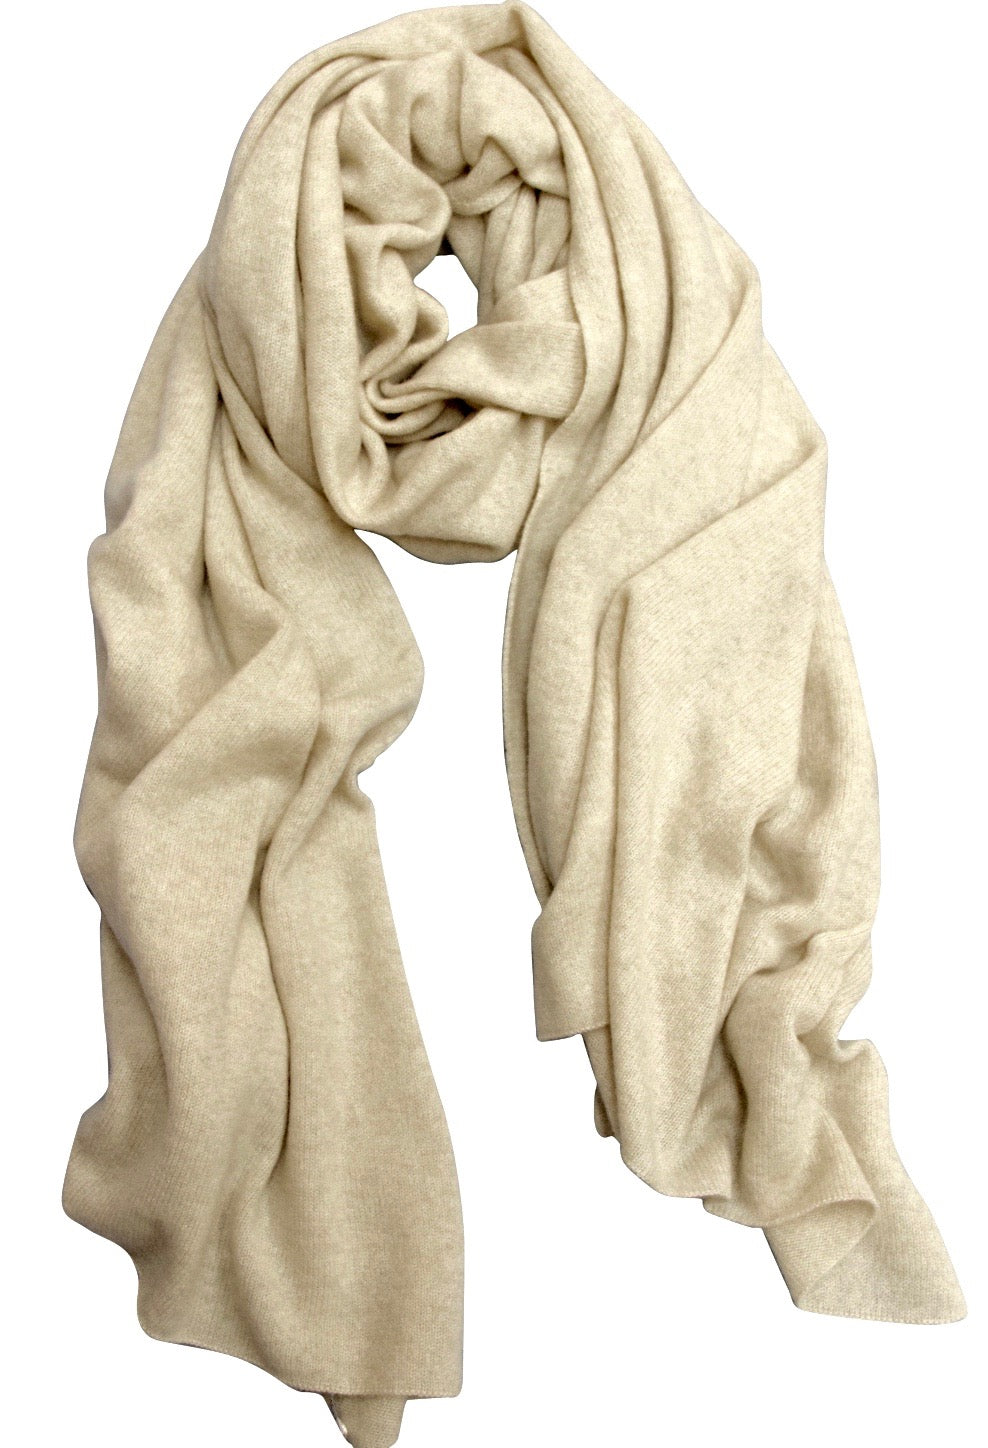 The Cashmere Travel Wrap Oatmeal